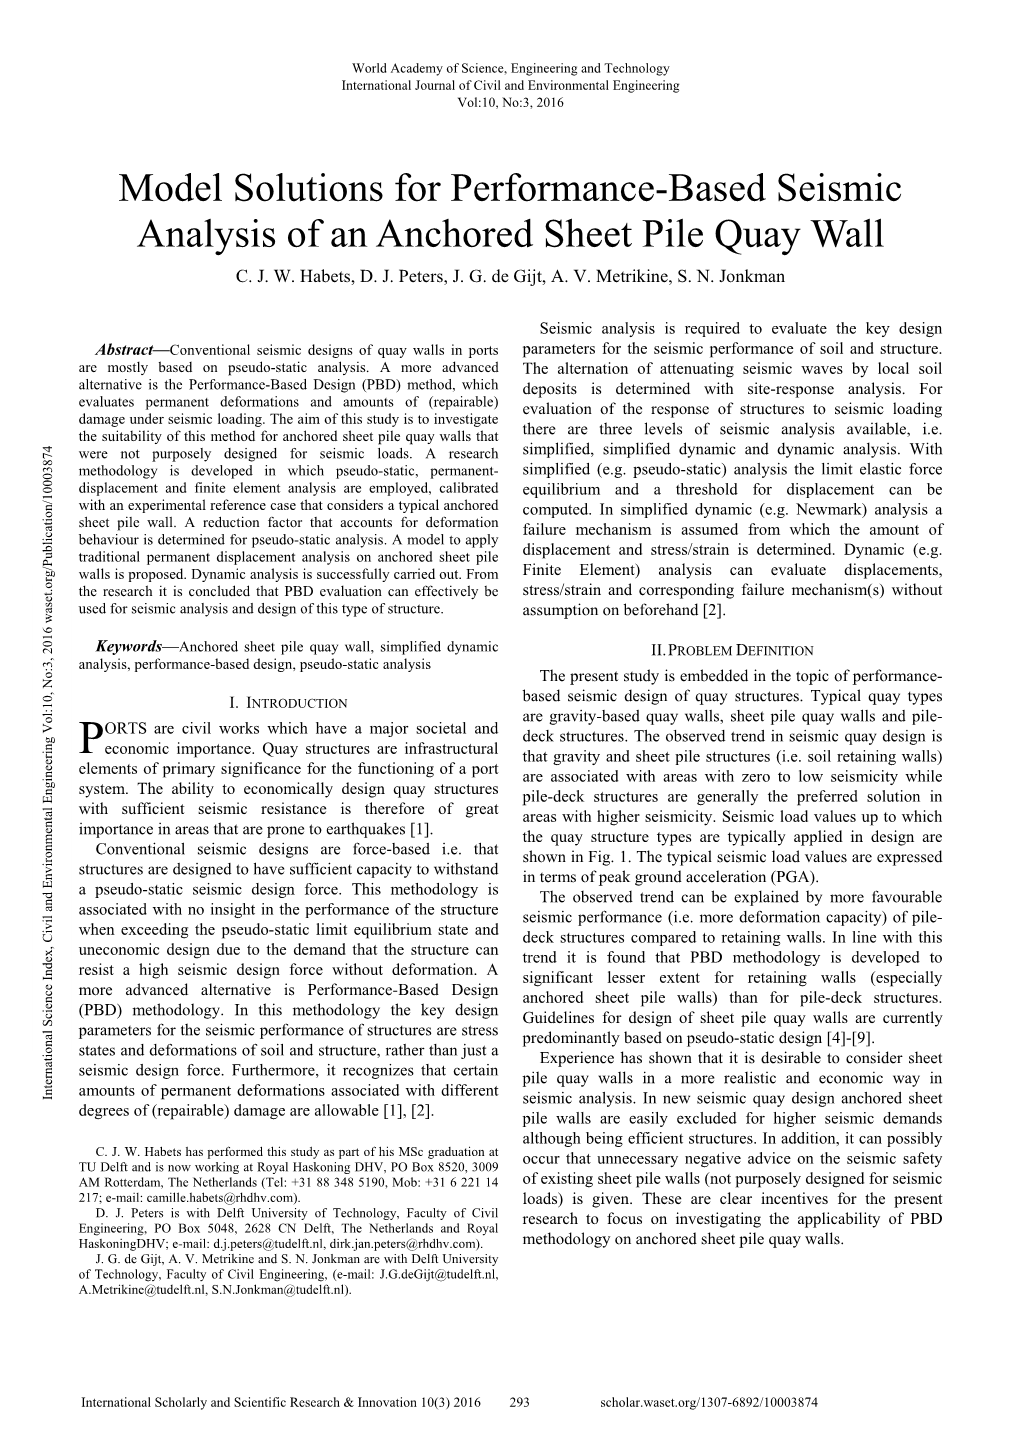 Model Solutions for Performance-Based Seismic Analysis of an Anchored Sheet Pile Quay Wall C